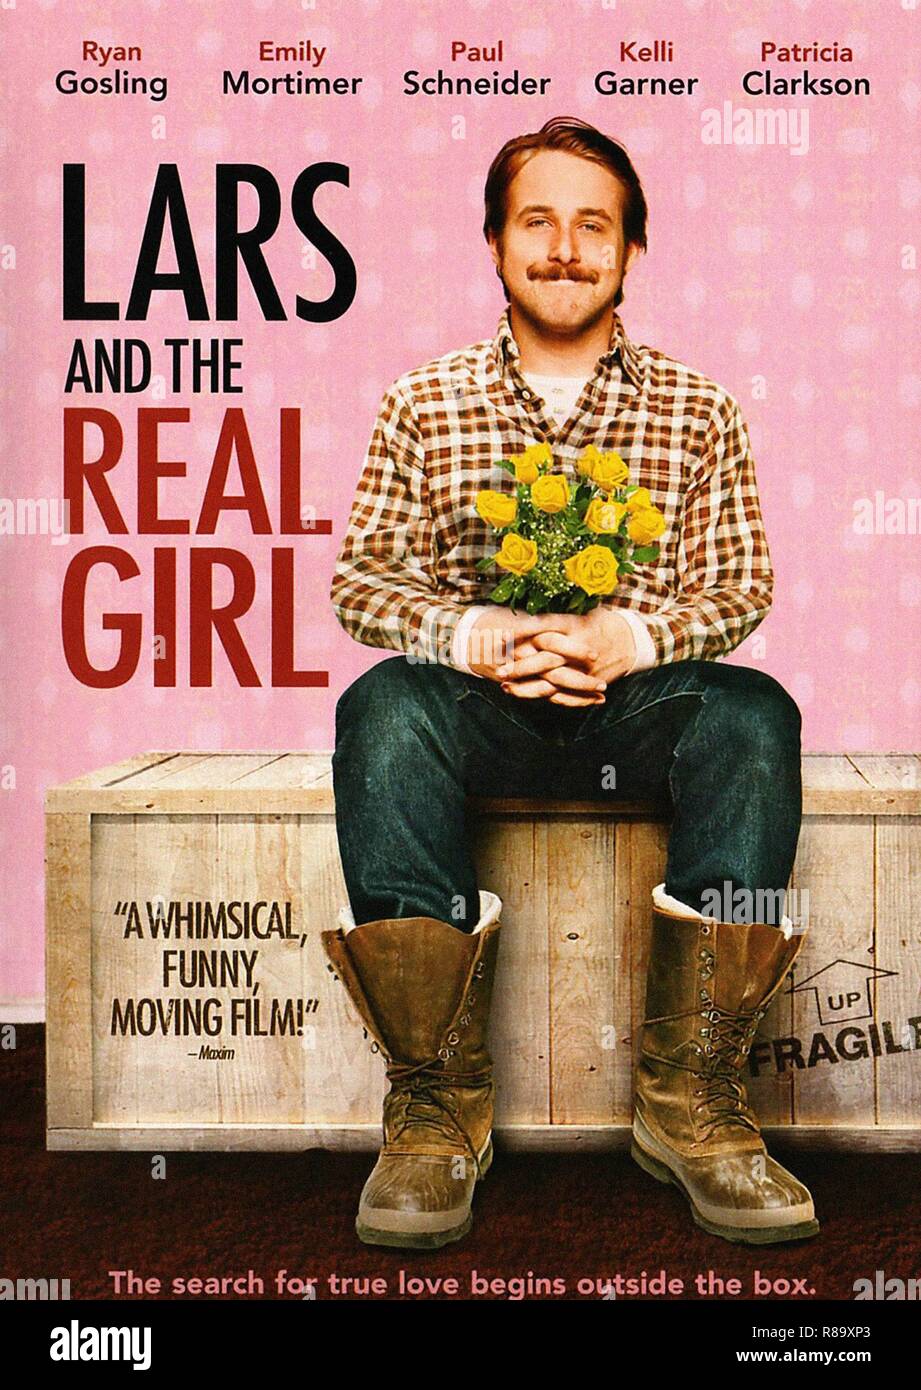 Lars and the real girl Year : 2007 USA Director : Craig Gillespie Ryan Gosling Poster (USA) Stock Photo